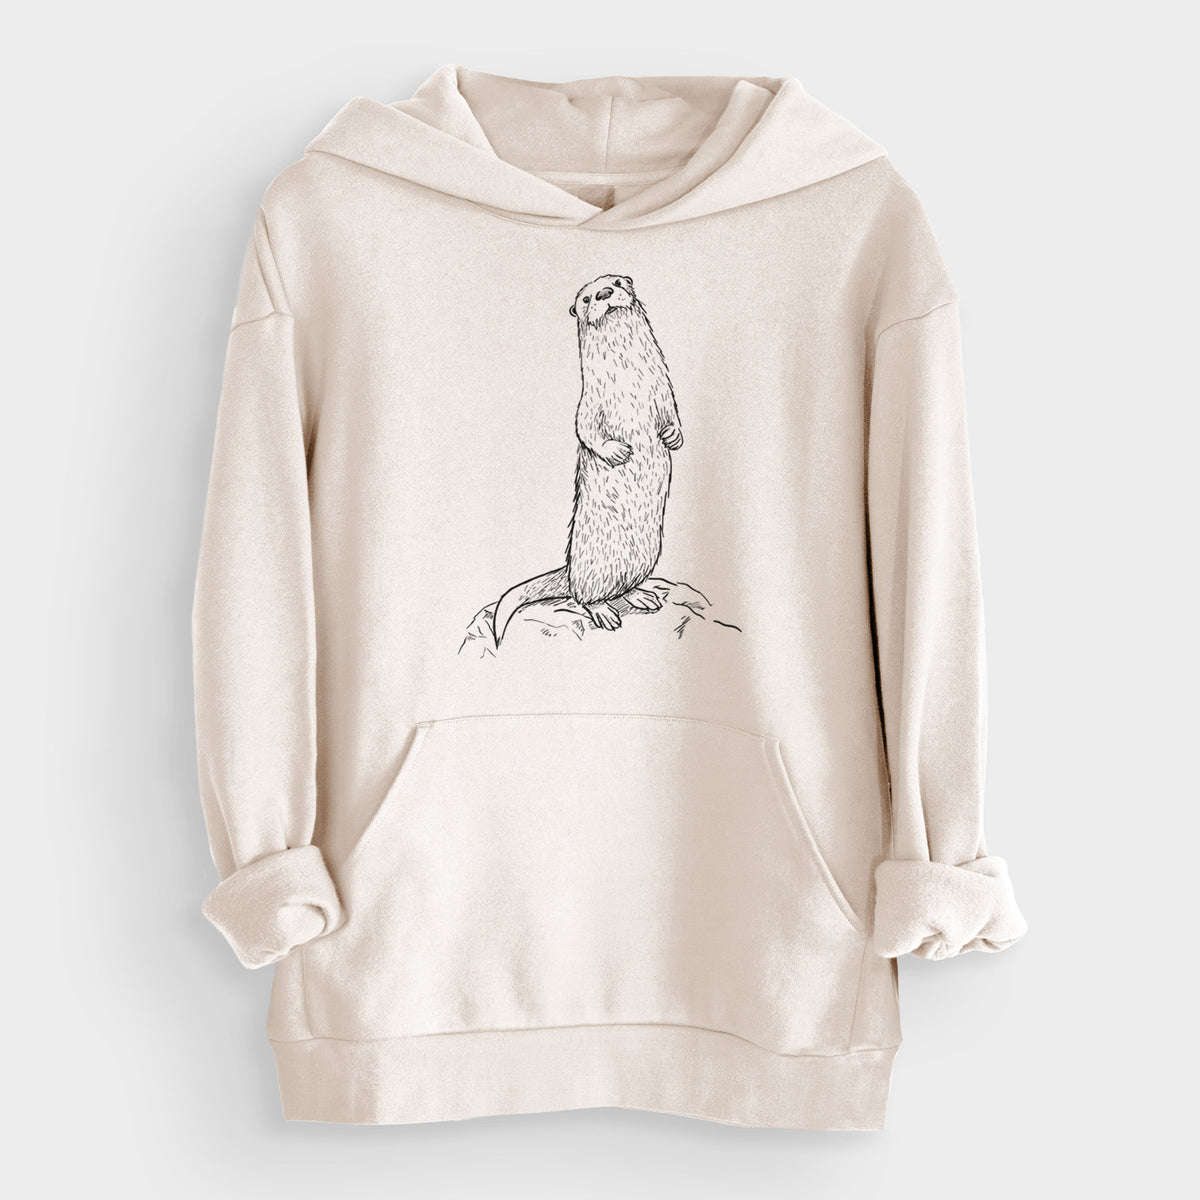 North American River Otter - Lontra canadensis  - Bodega Midweight Hoodie